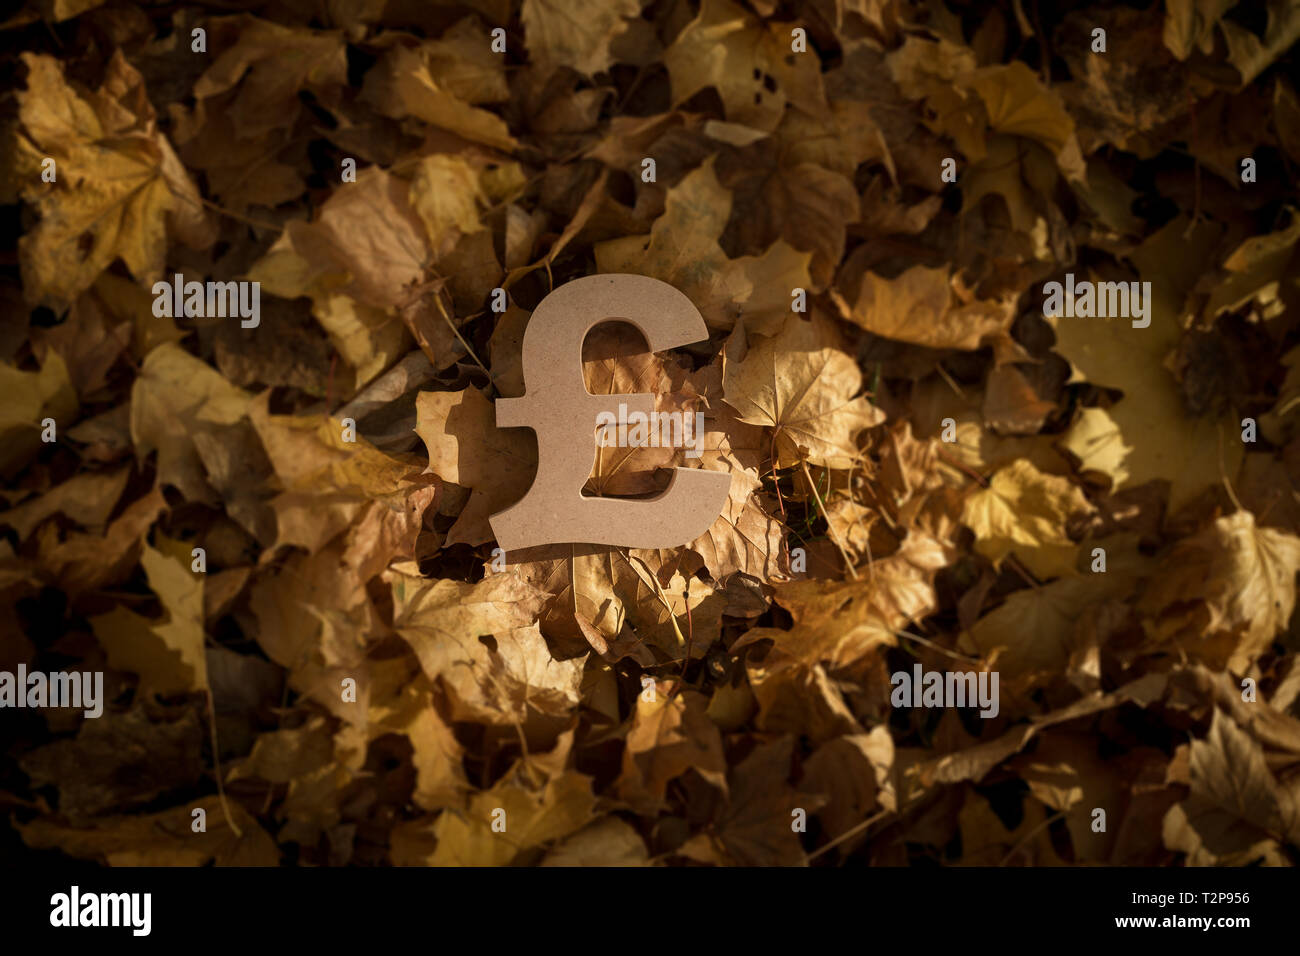 British Pound Sterling Currency Symbol on Autumn Leaves in Late evening Sun Stock Photo